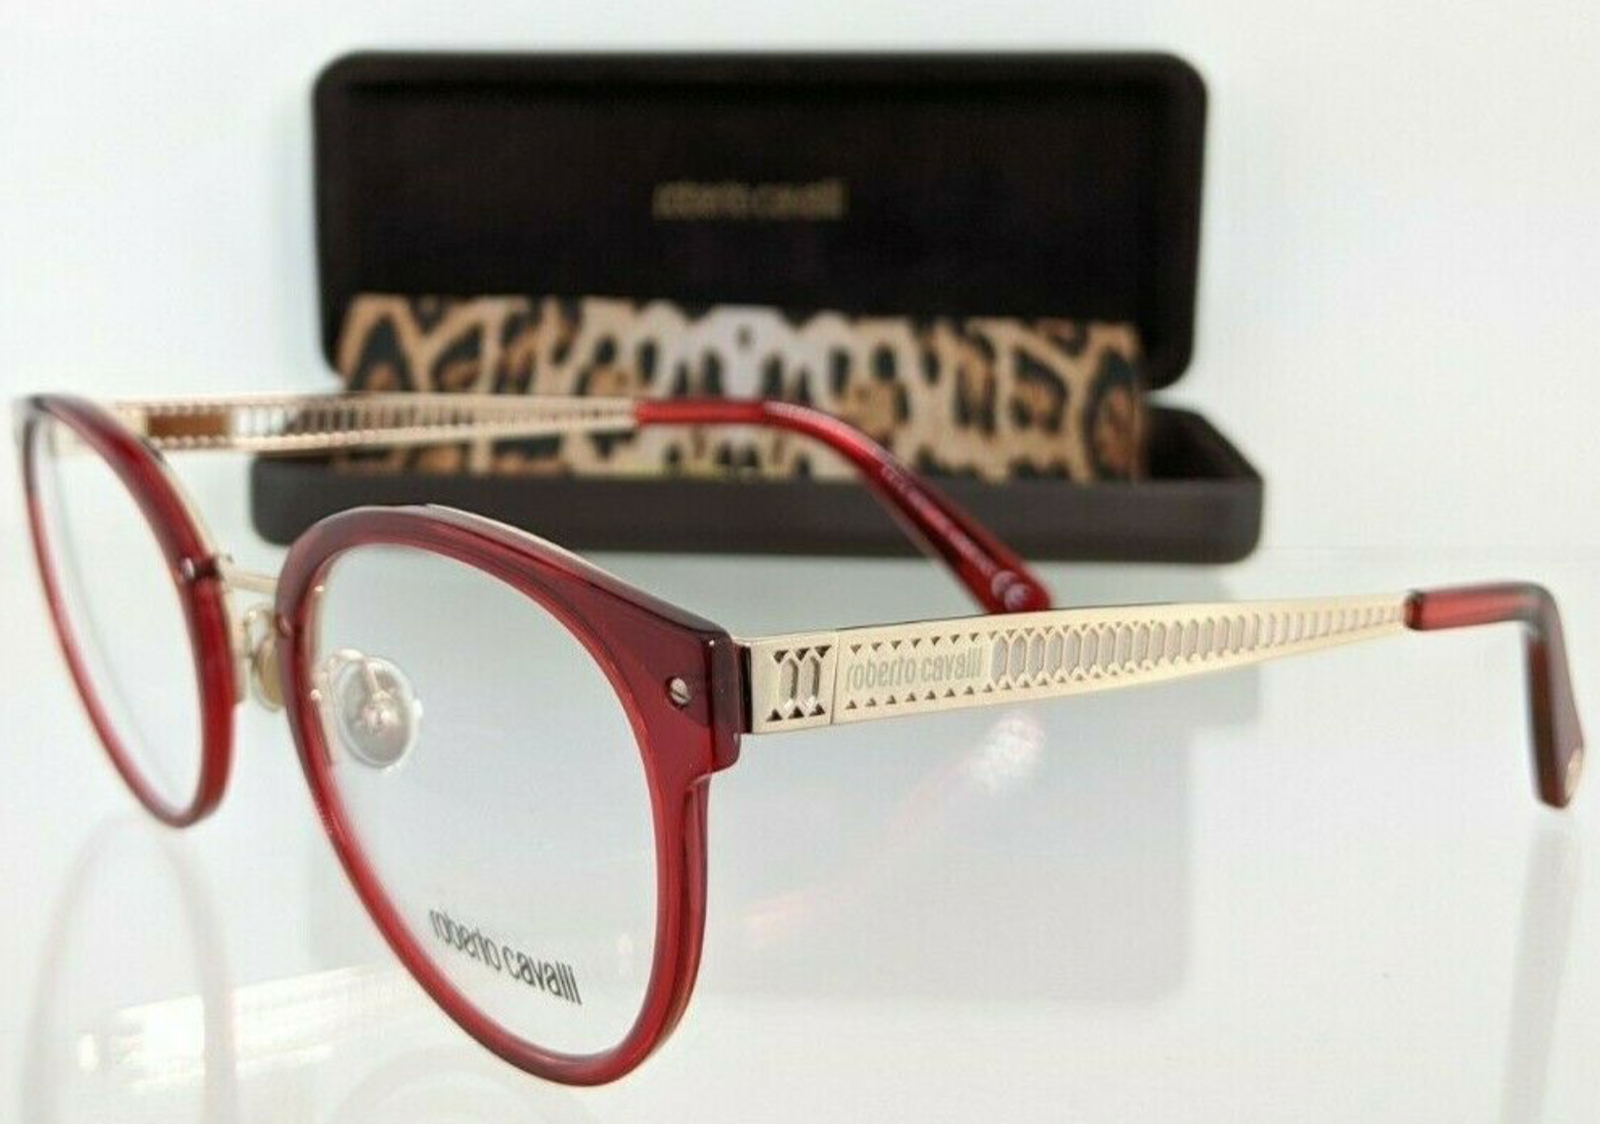 Brand New Authentic Roberto Cavalli Eyeglasses RC 5099 066 51mm Red & Gold Frame